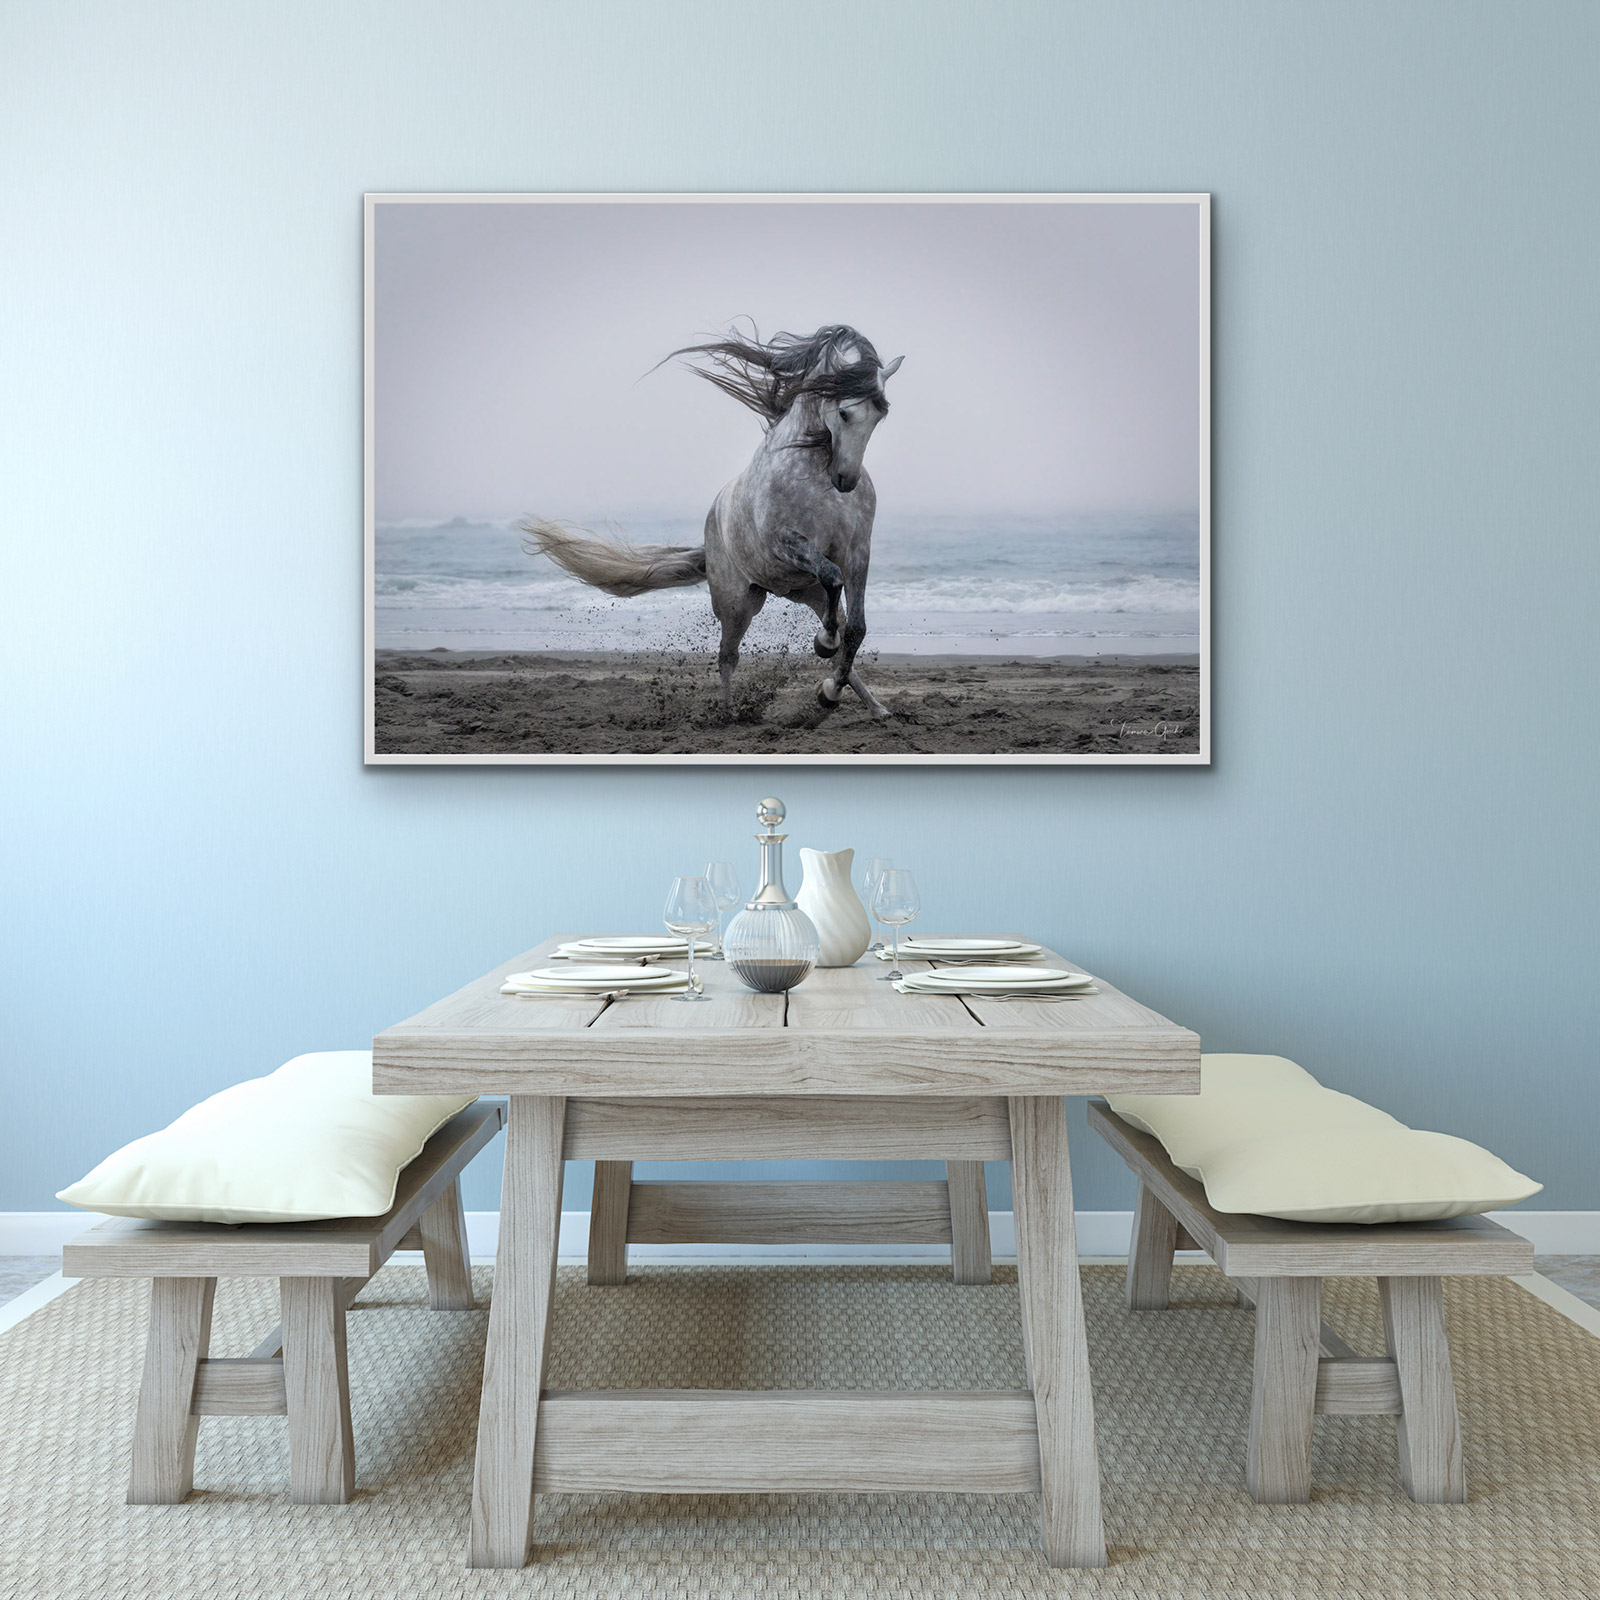 Andalusian Horse on the Beach photo print shown framed in a dining room